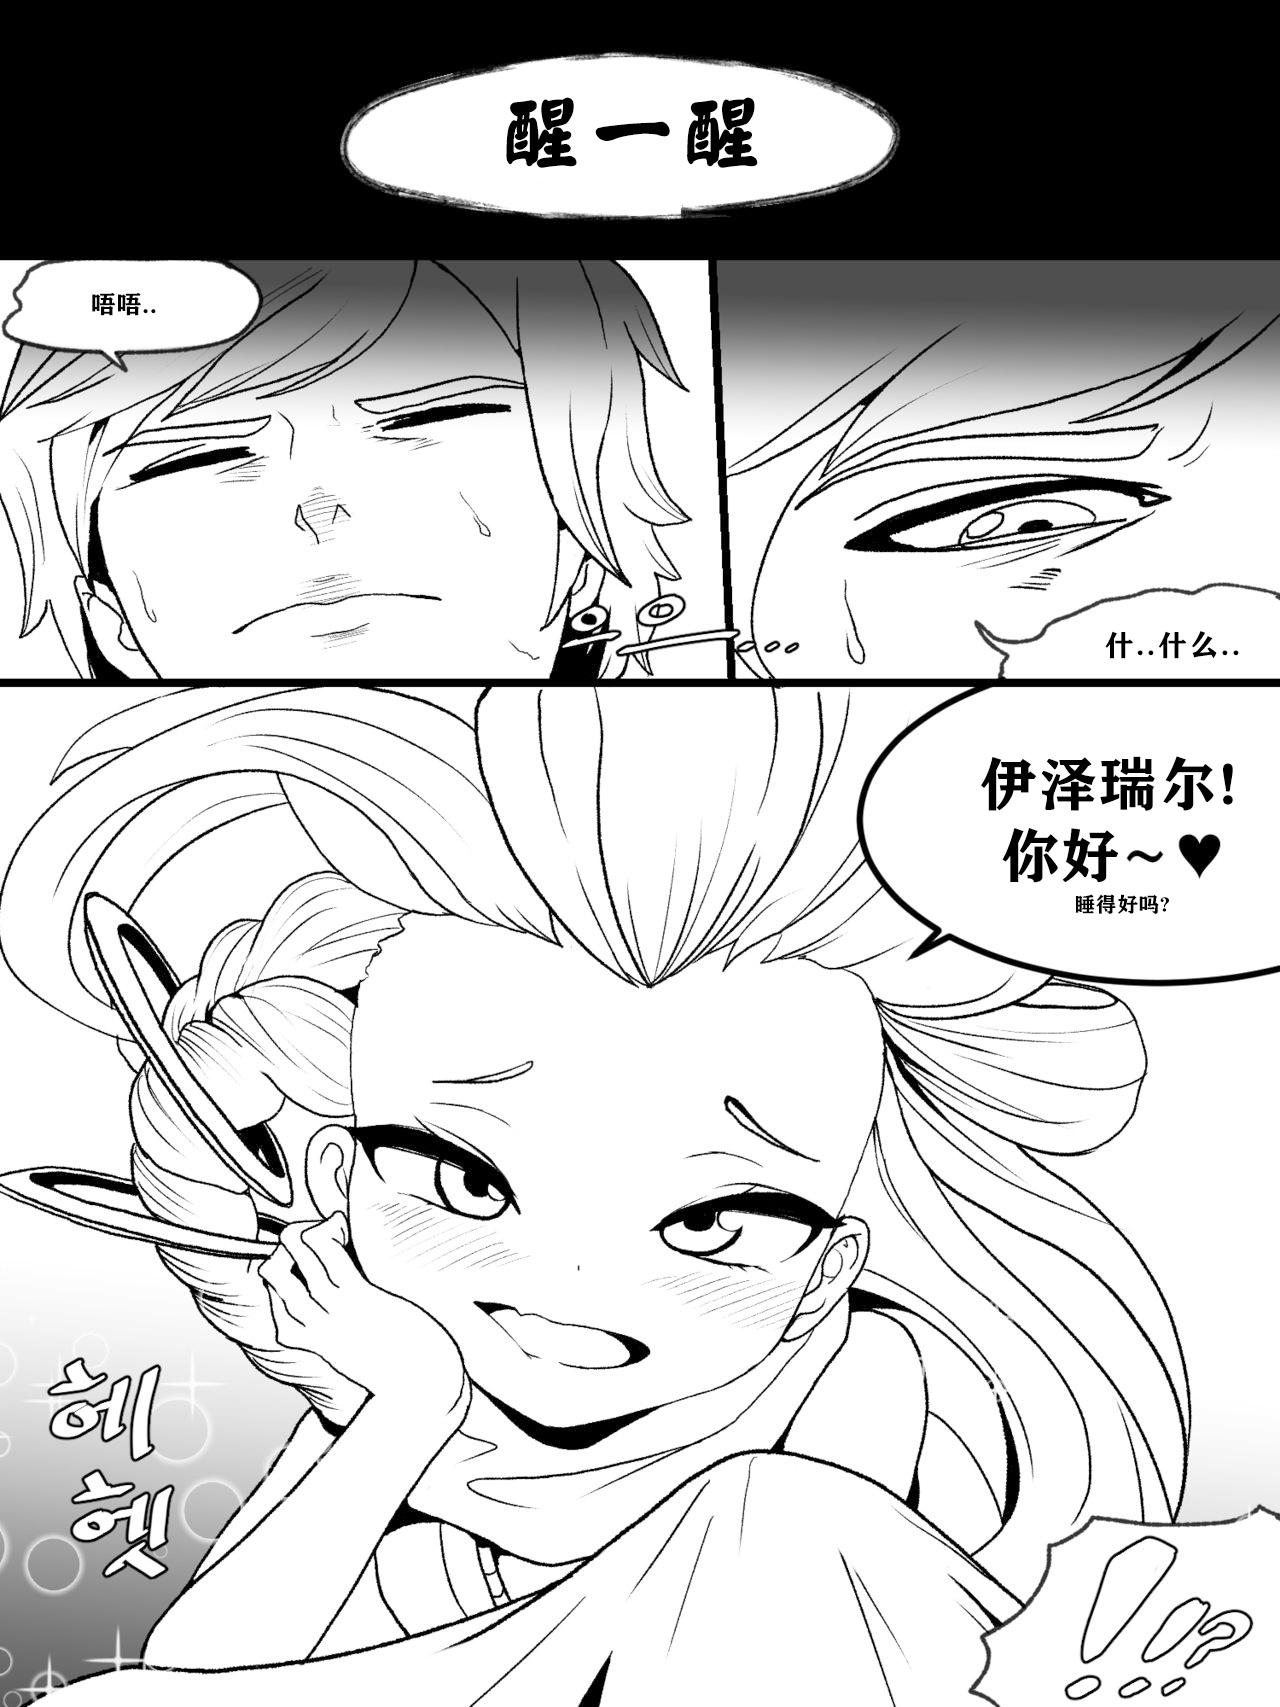 Bangladeshi The reality in the starlight | 星光中的真实 - League of legends Thick - Page 4